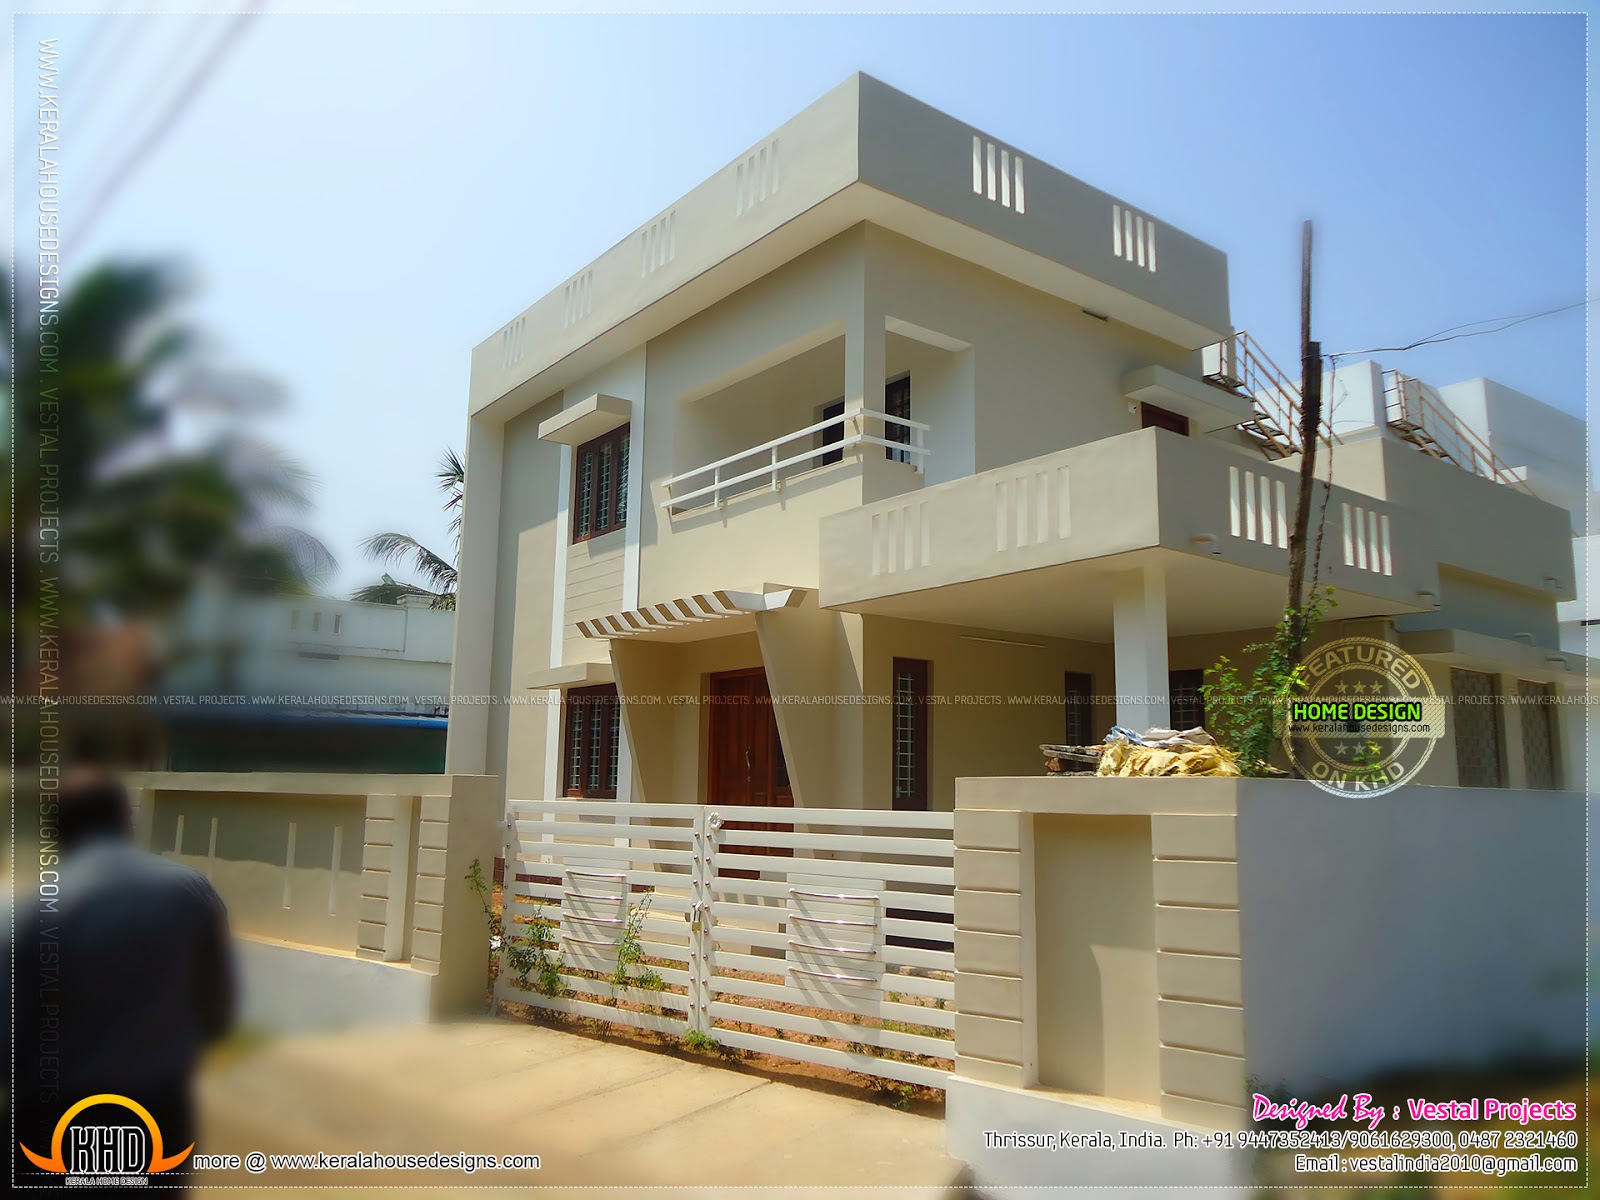 1450 Square Feet House With 4 22 Cents Of Land Kerala Home Design And Floor Plans 8000 Houses Indian roof boundary wall design house plans with photos designs. 1450 square feet house with 4 22 cents